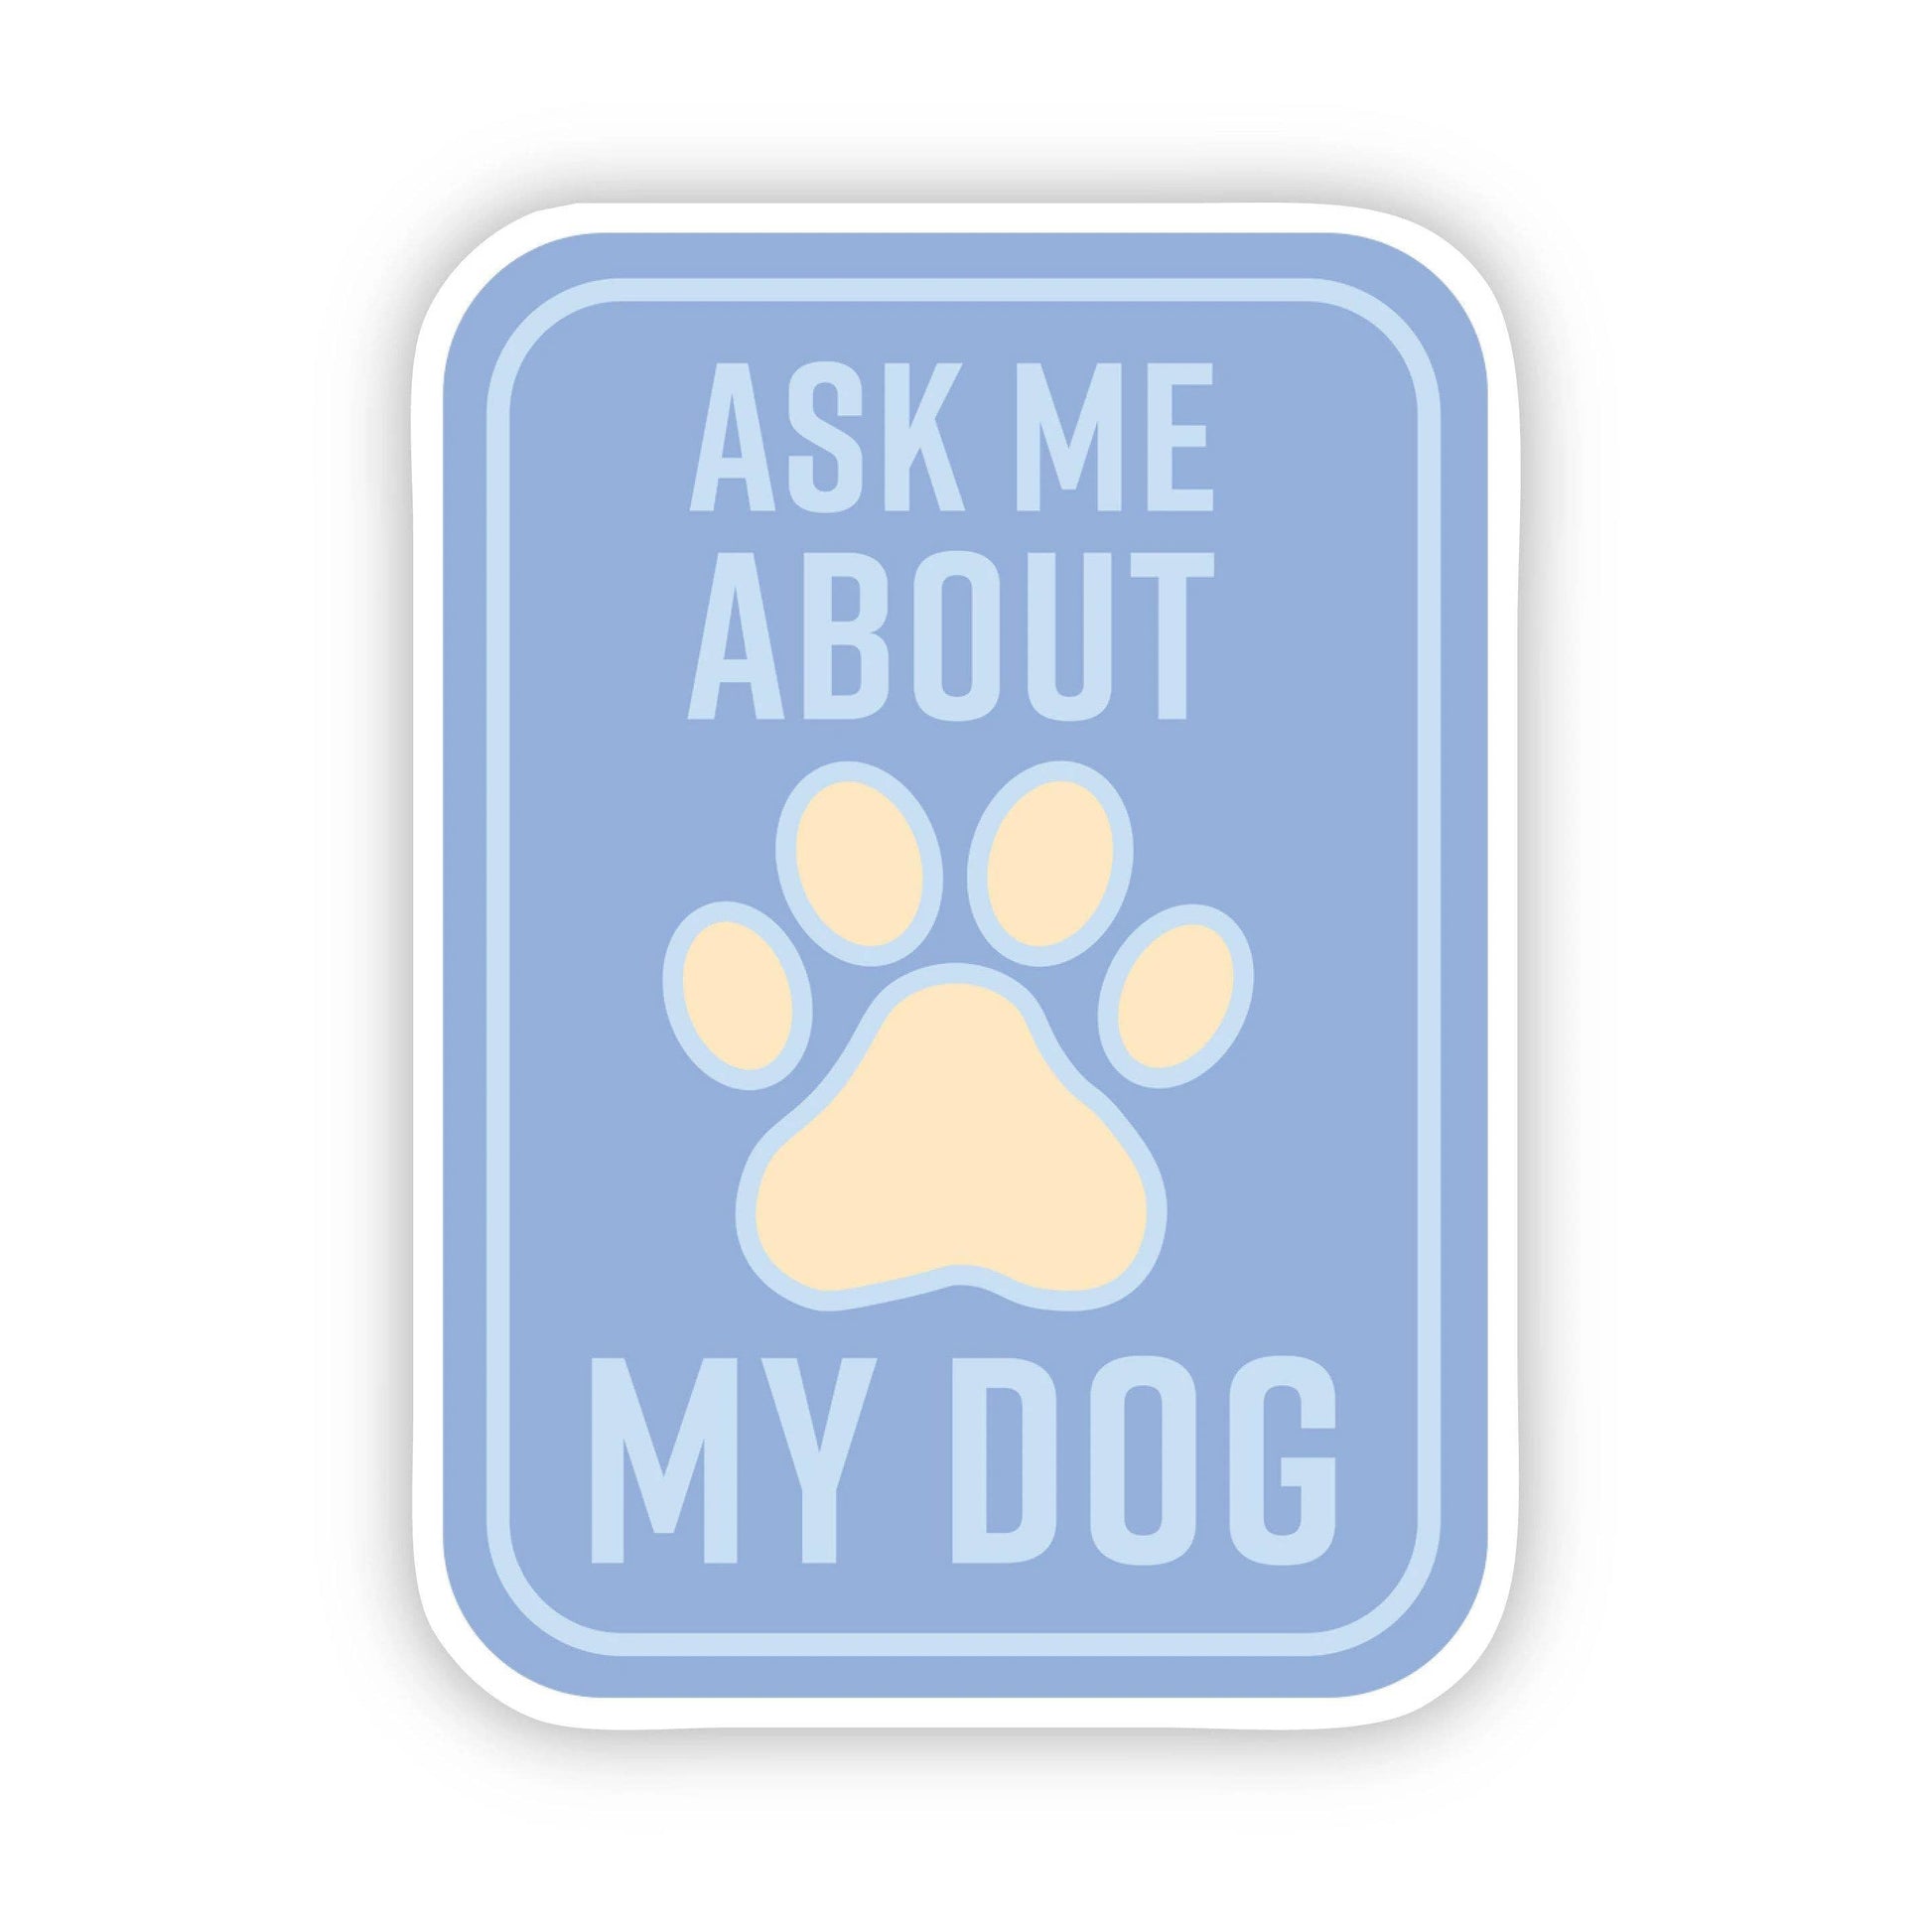 Ask me about my dog sticker blue, by Big Moods